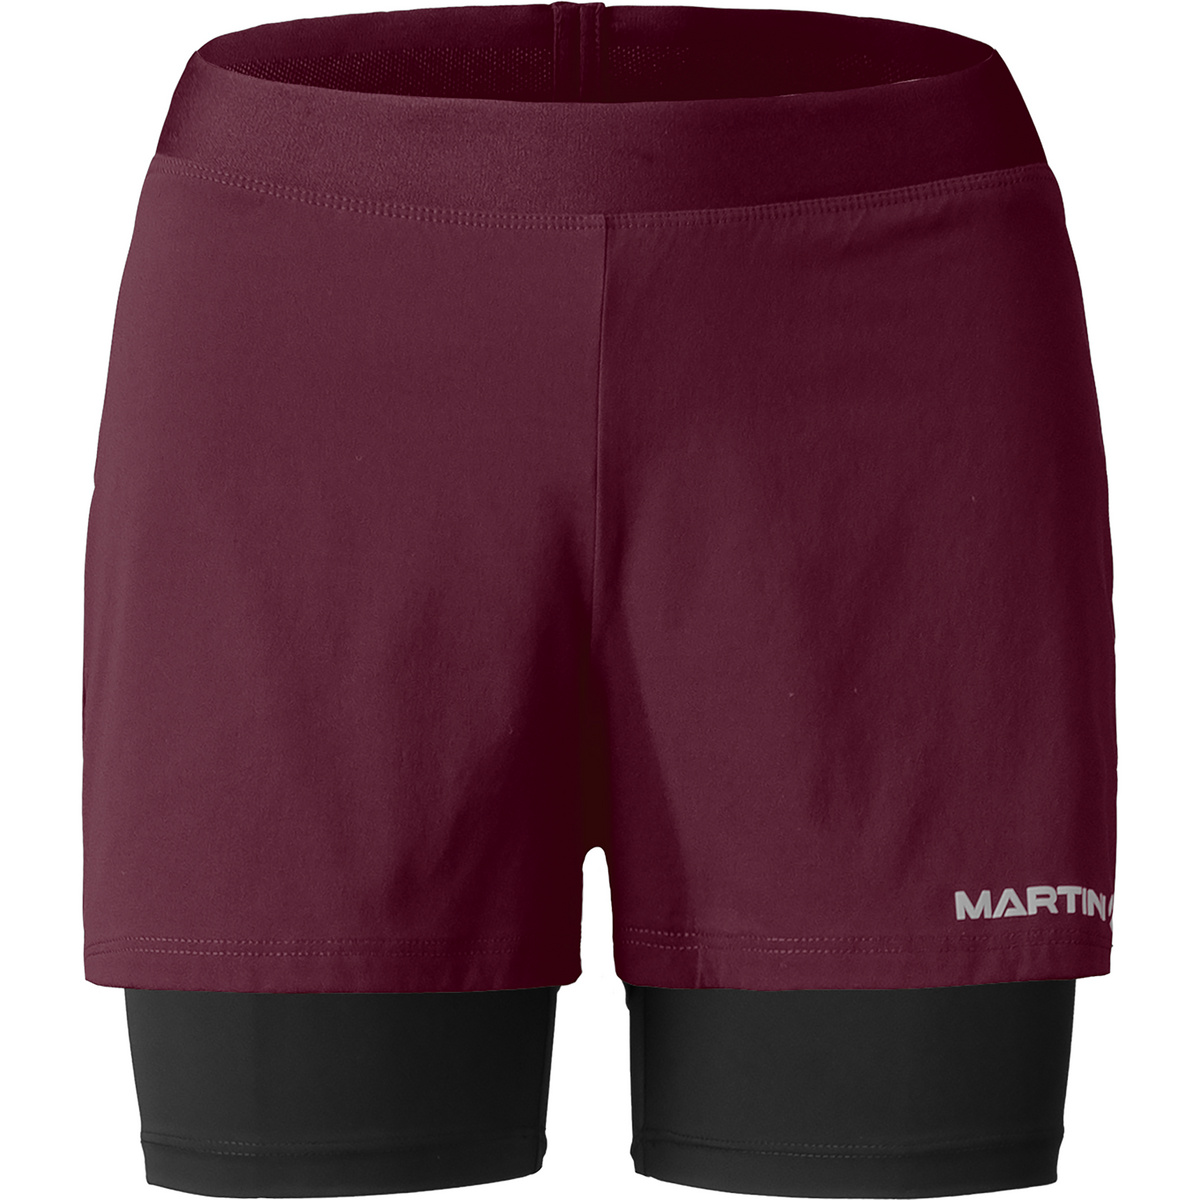 Image of Martini Sportswear Donna Pantaloncini 2in1 Pacemaker